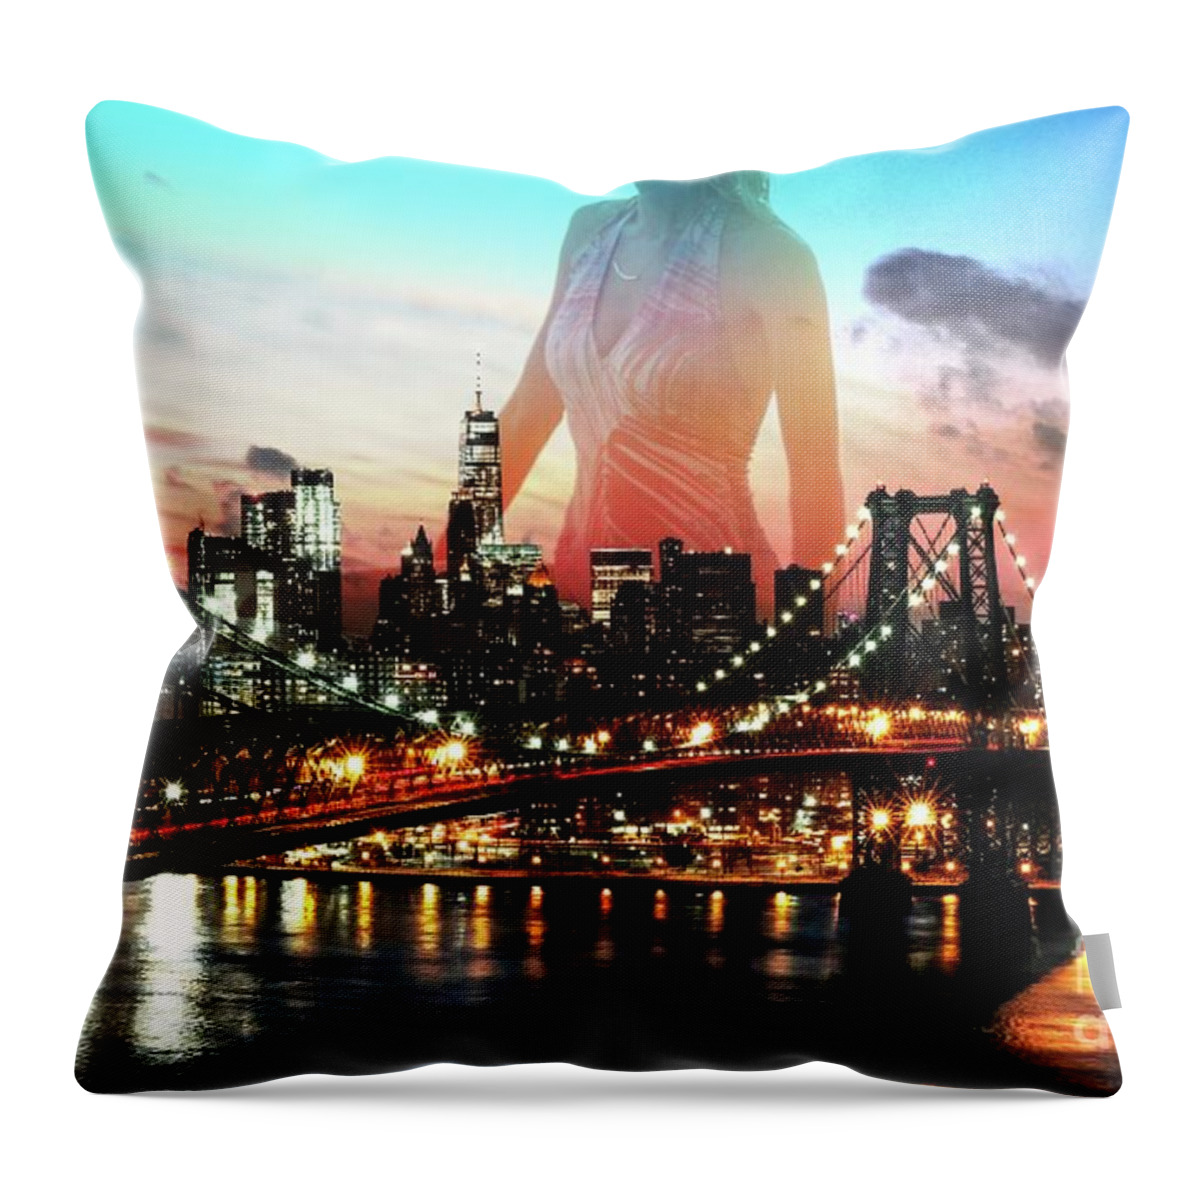 Dance Throw Pillow featuring the mixed media City Woman by Yvonne Padmos